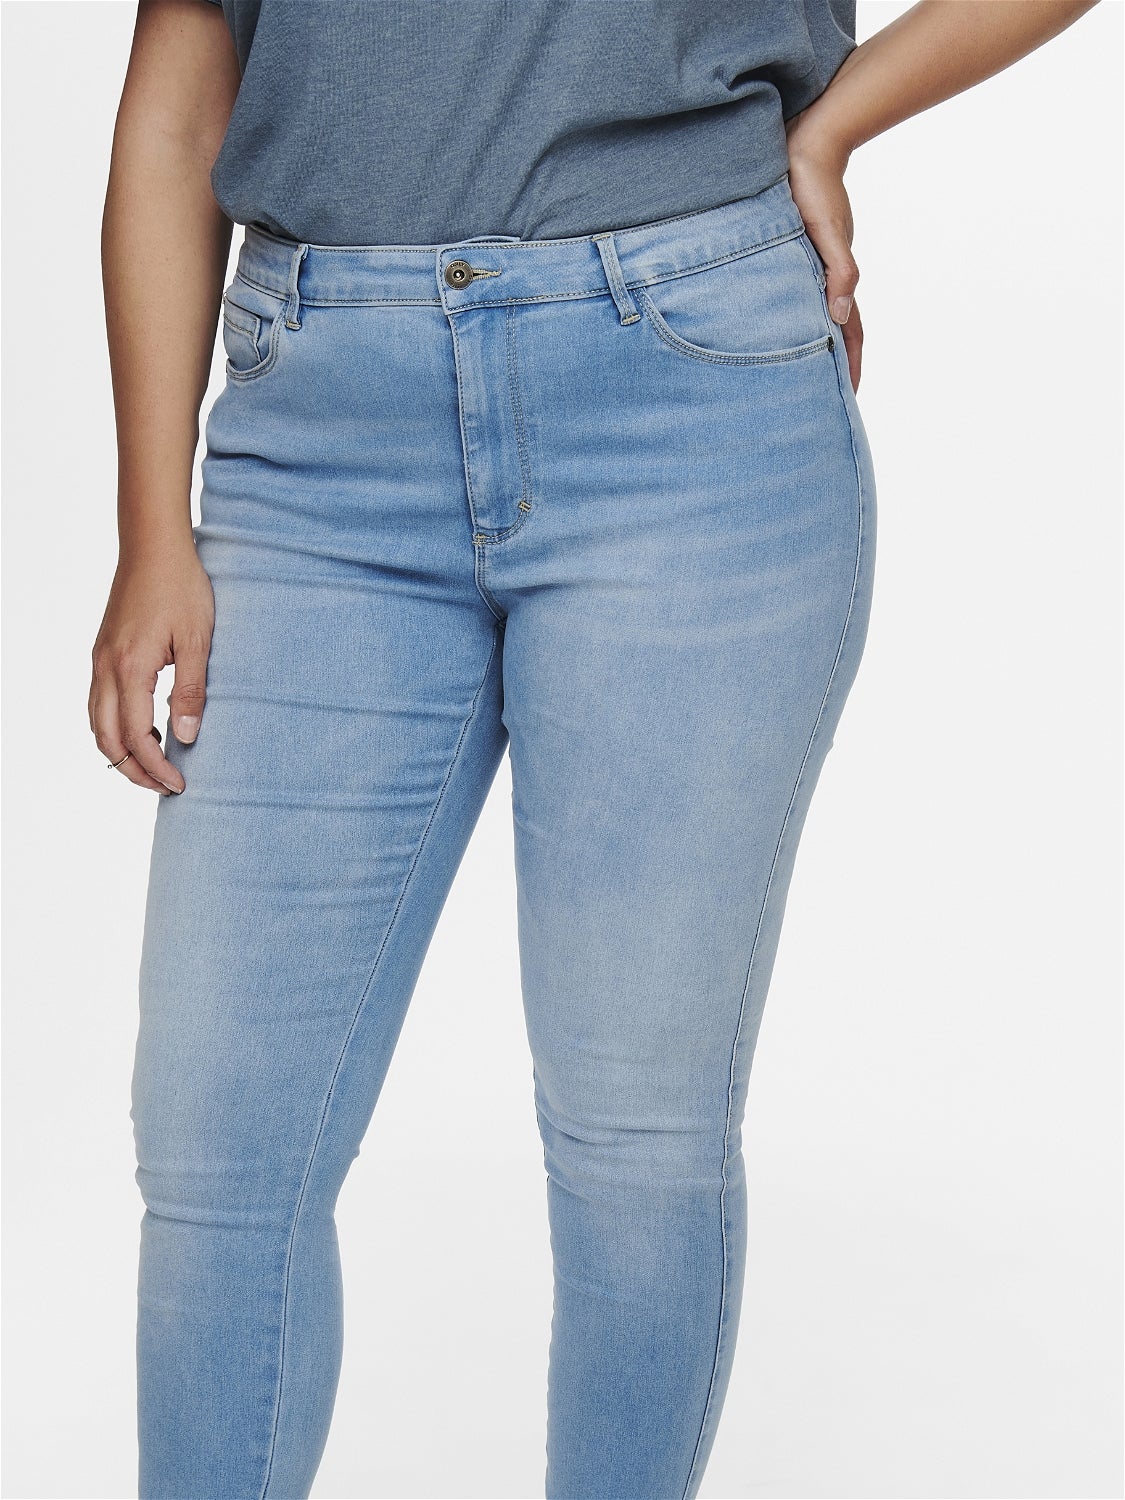 Curvy CarAugusta hw Skinny fit | | Light ONLY® jeans Blue